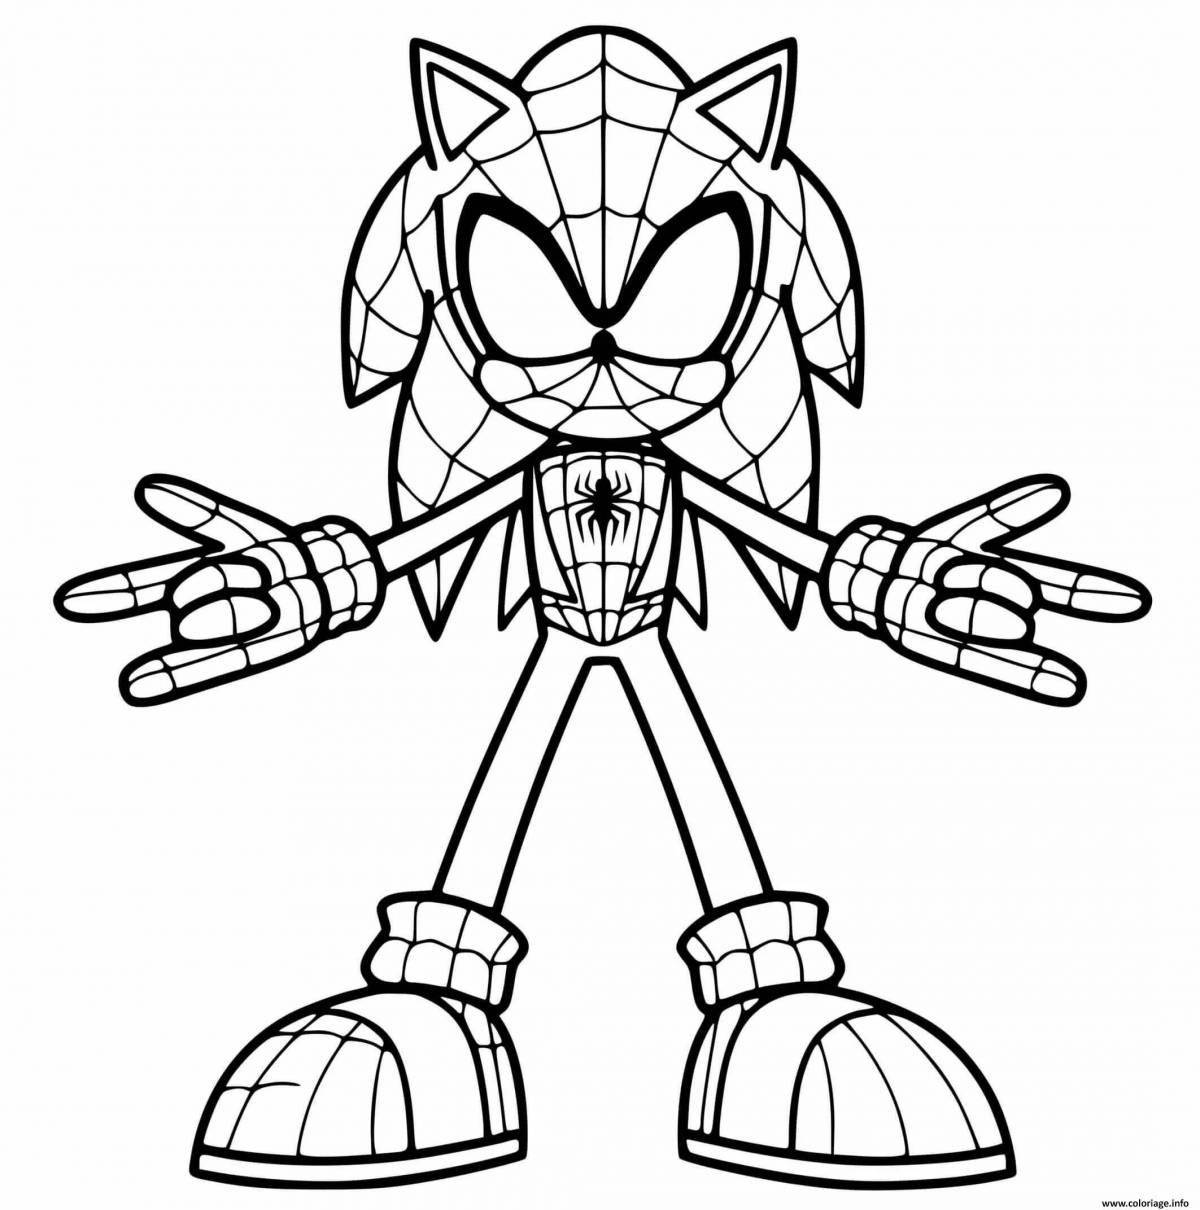 Exalted sonic god coloring book